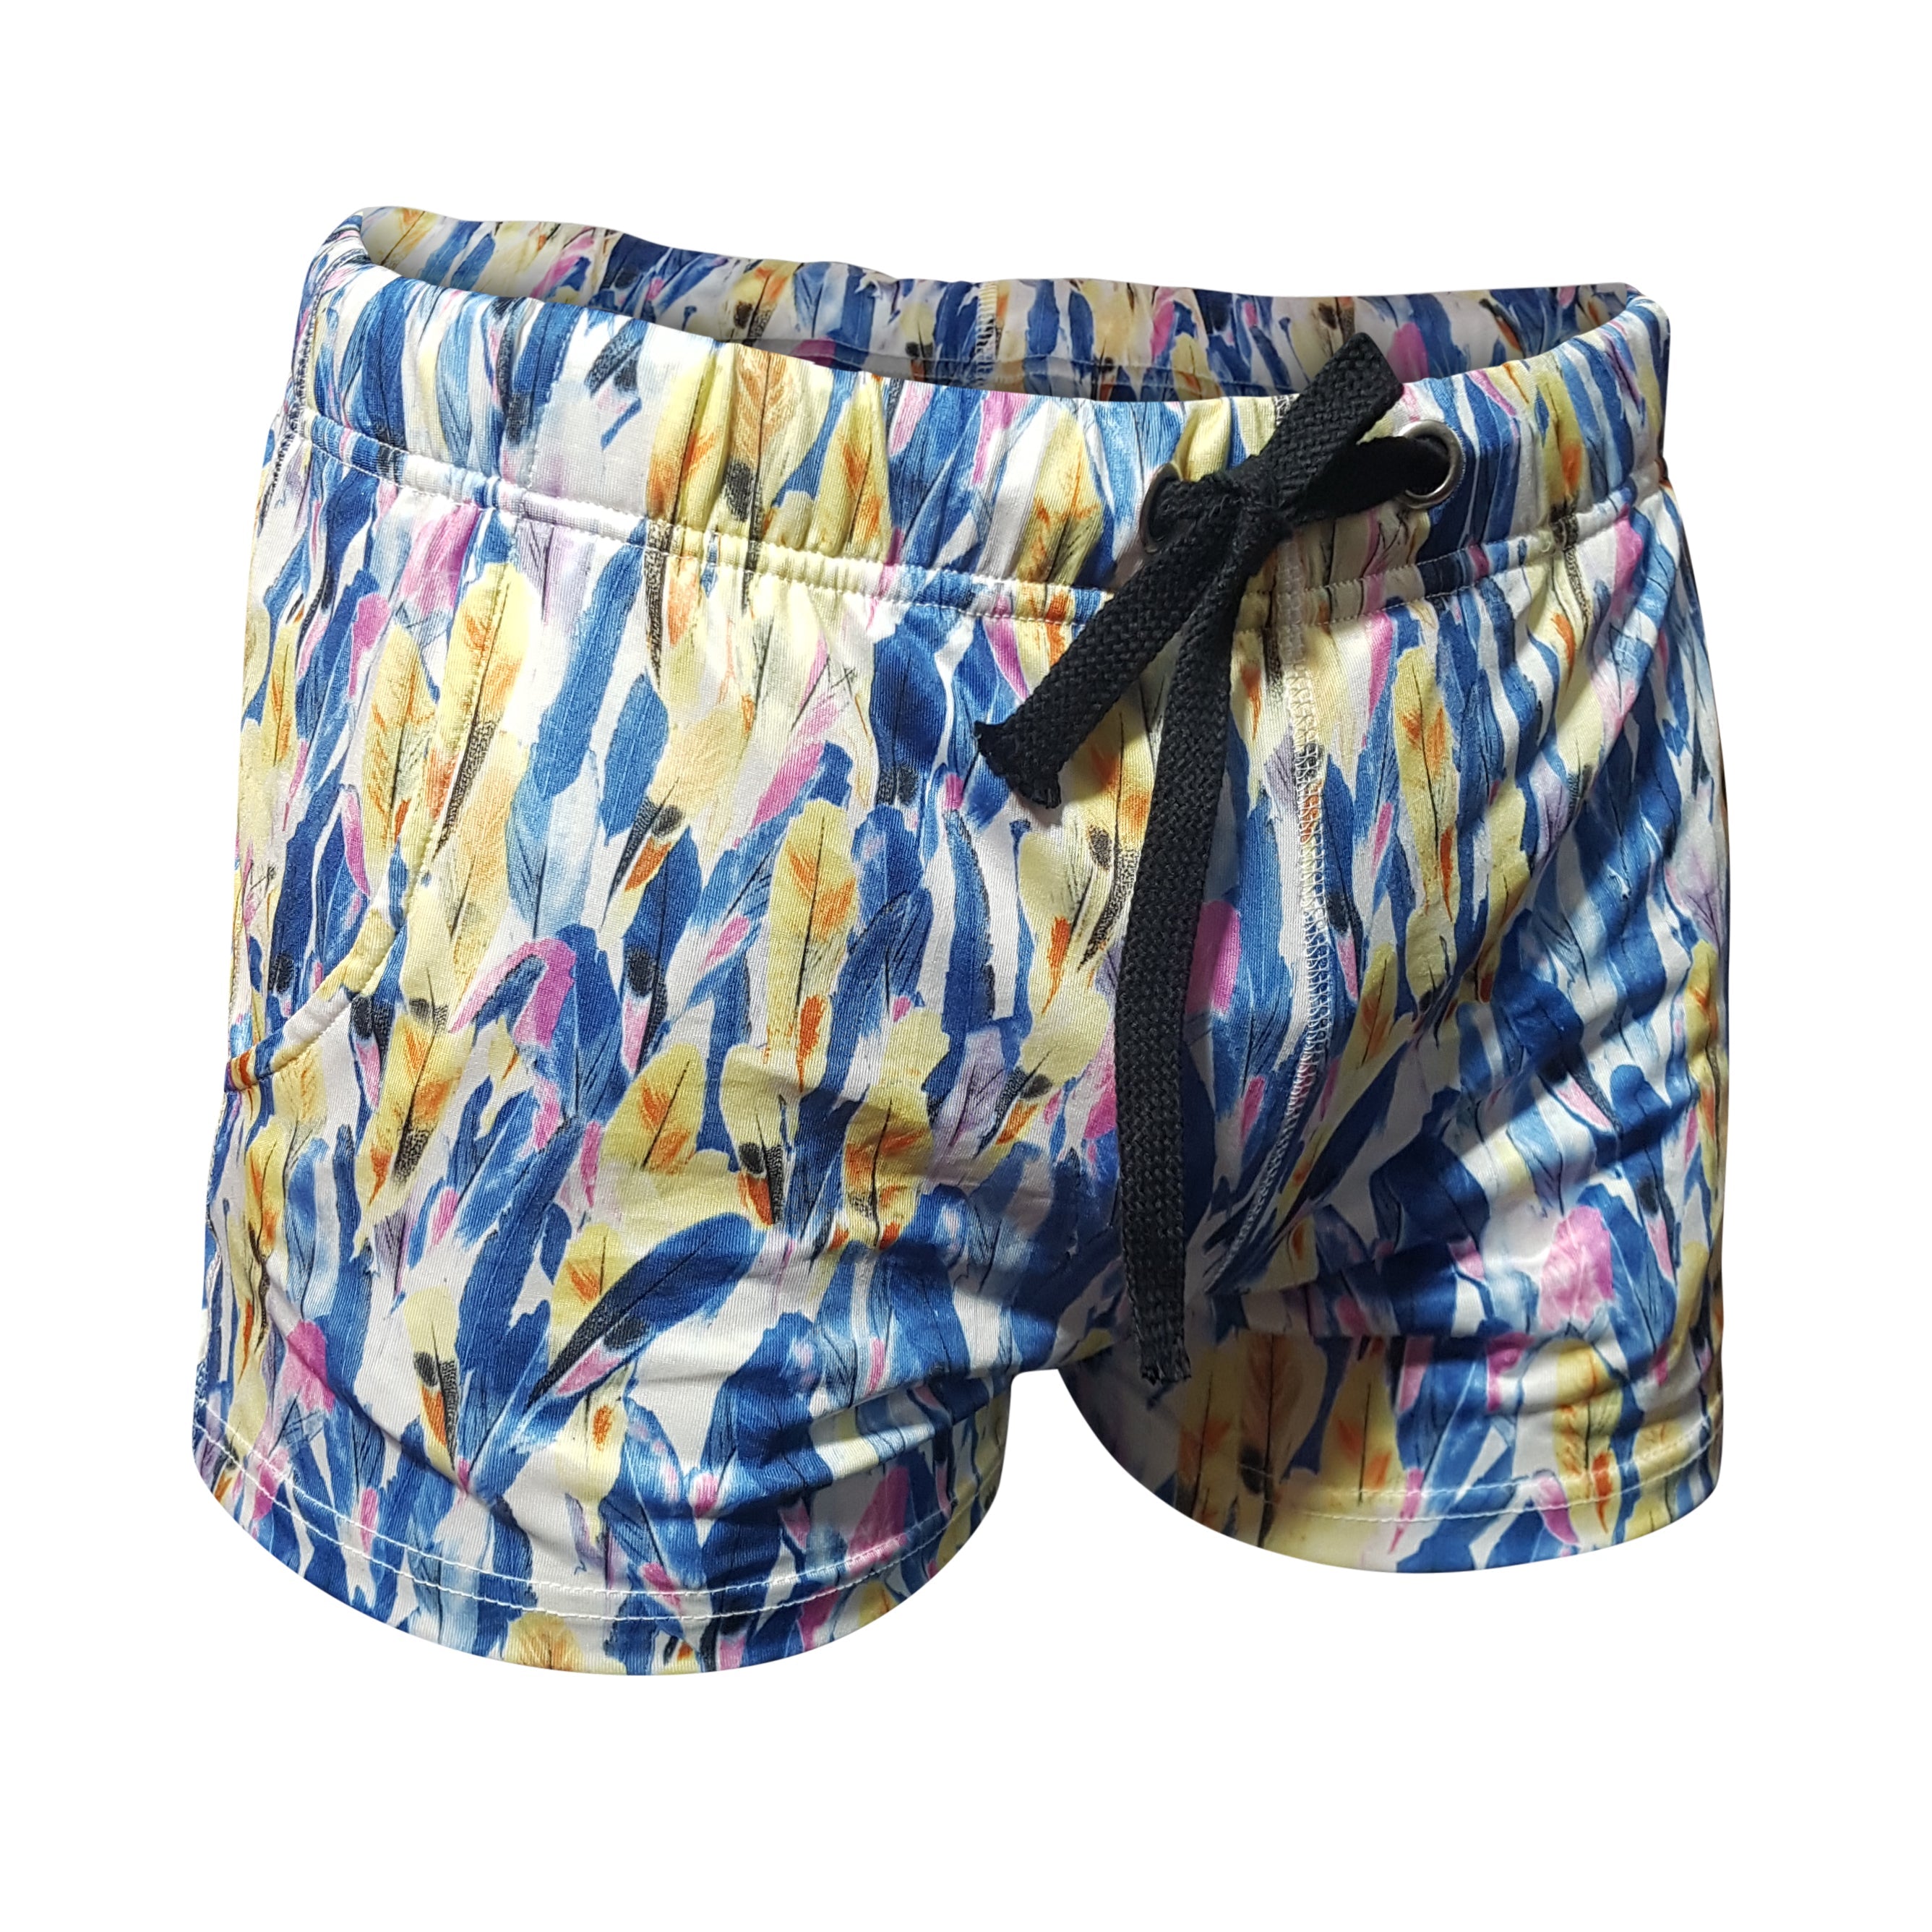 KINEO FEATHERED SWIM TRUNK - DealByEthan.gay